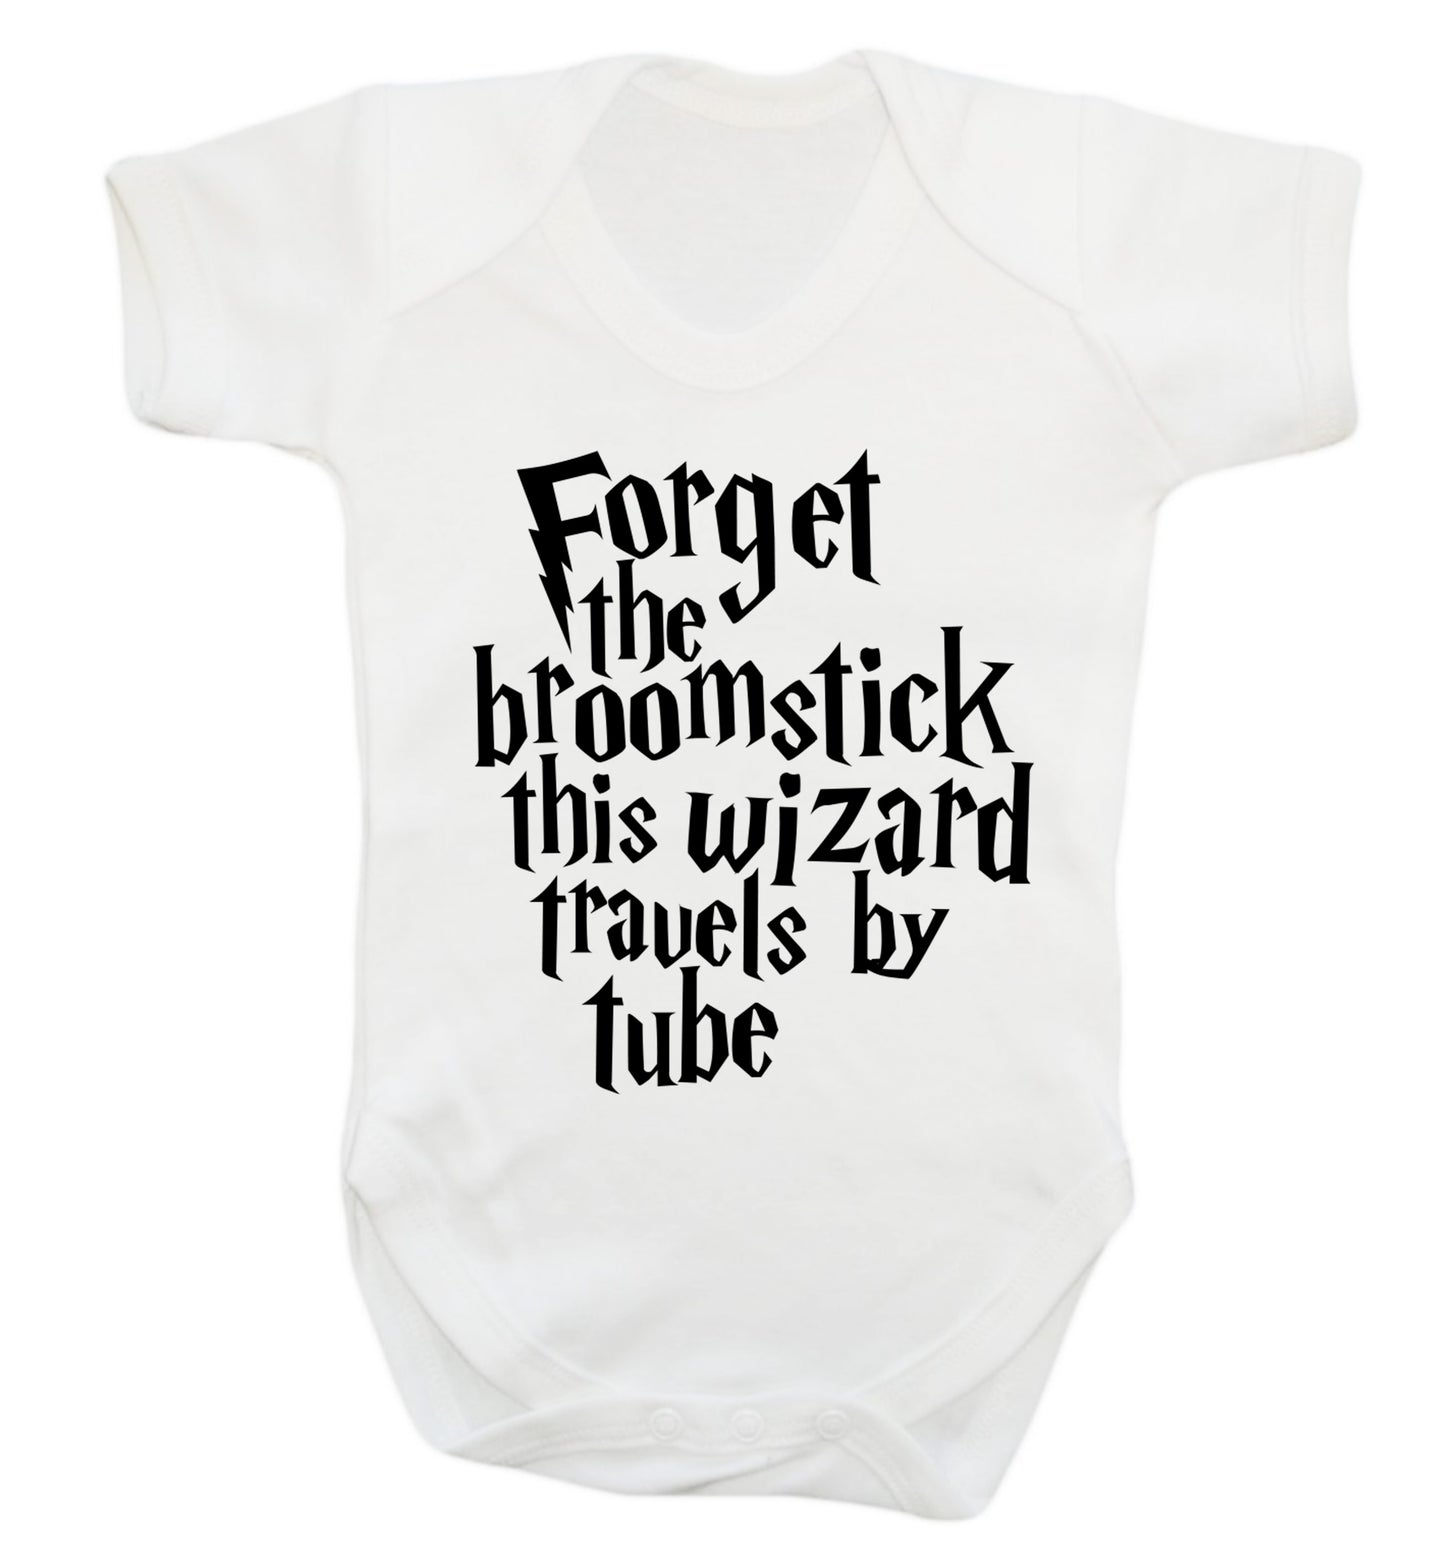 Forget the broomstick this wizard travels by tube Baby Vest white 18-24 months